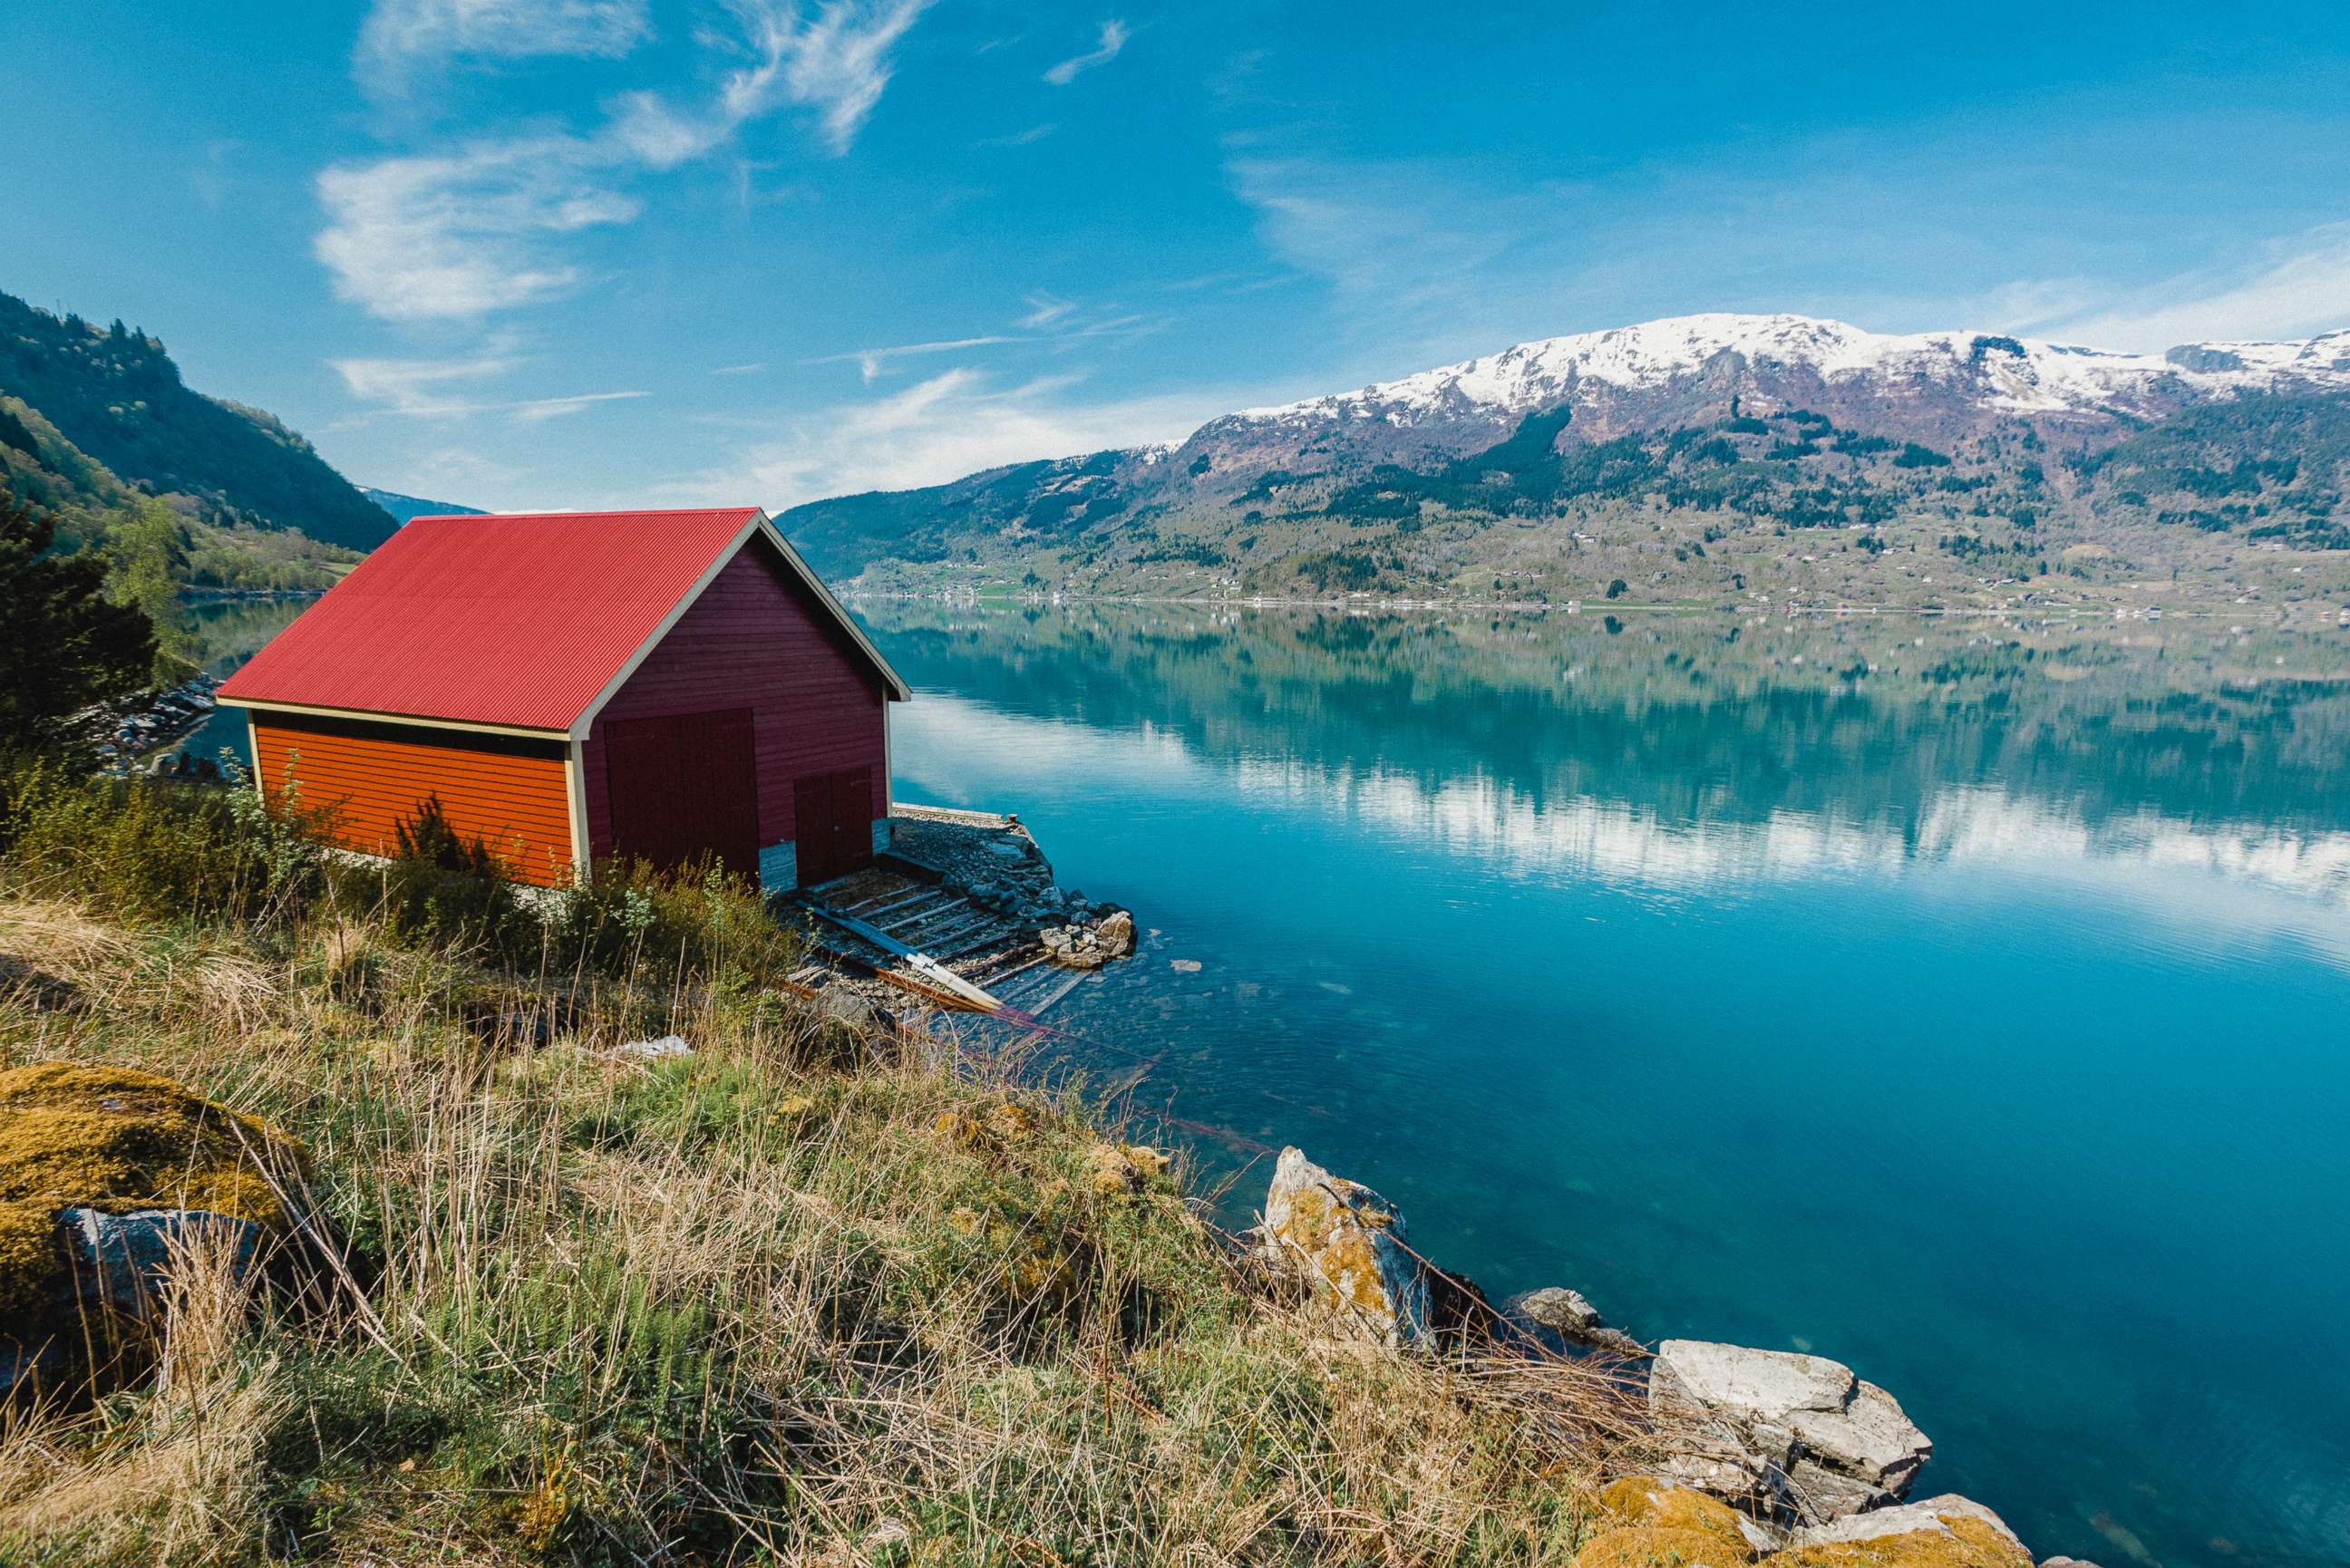 PHOTO: A red house barn is pictured on the Fjord in Norway in this undated stock photo.